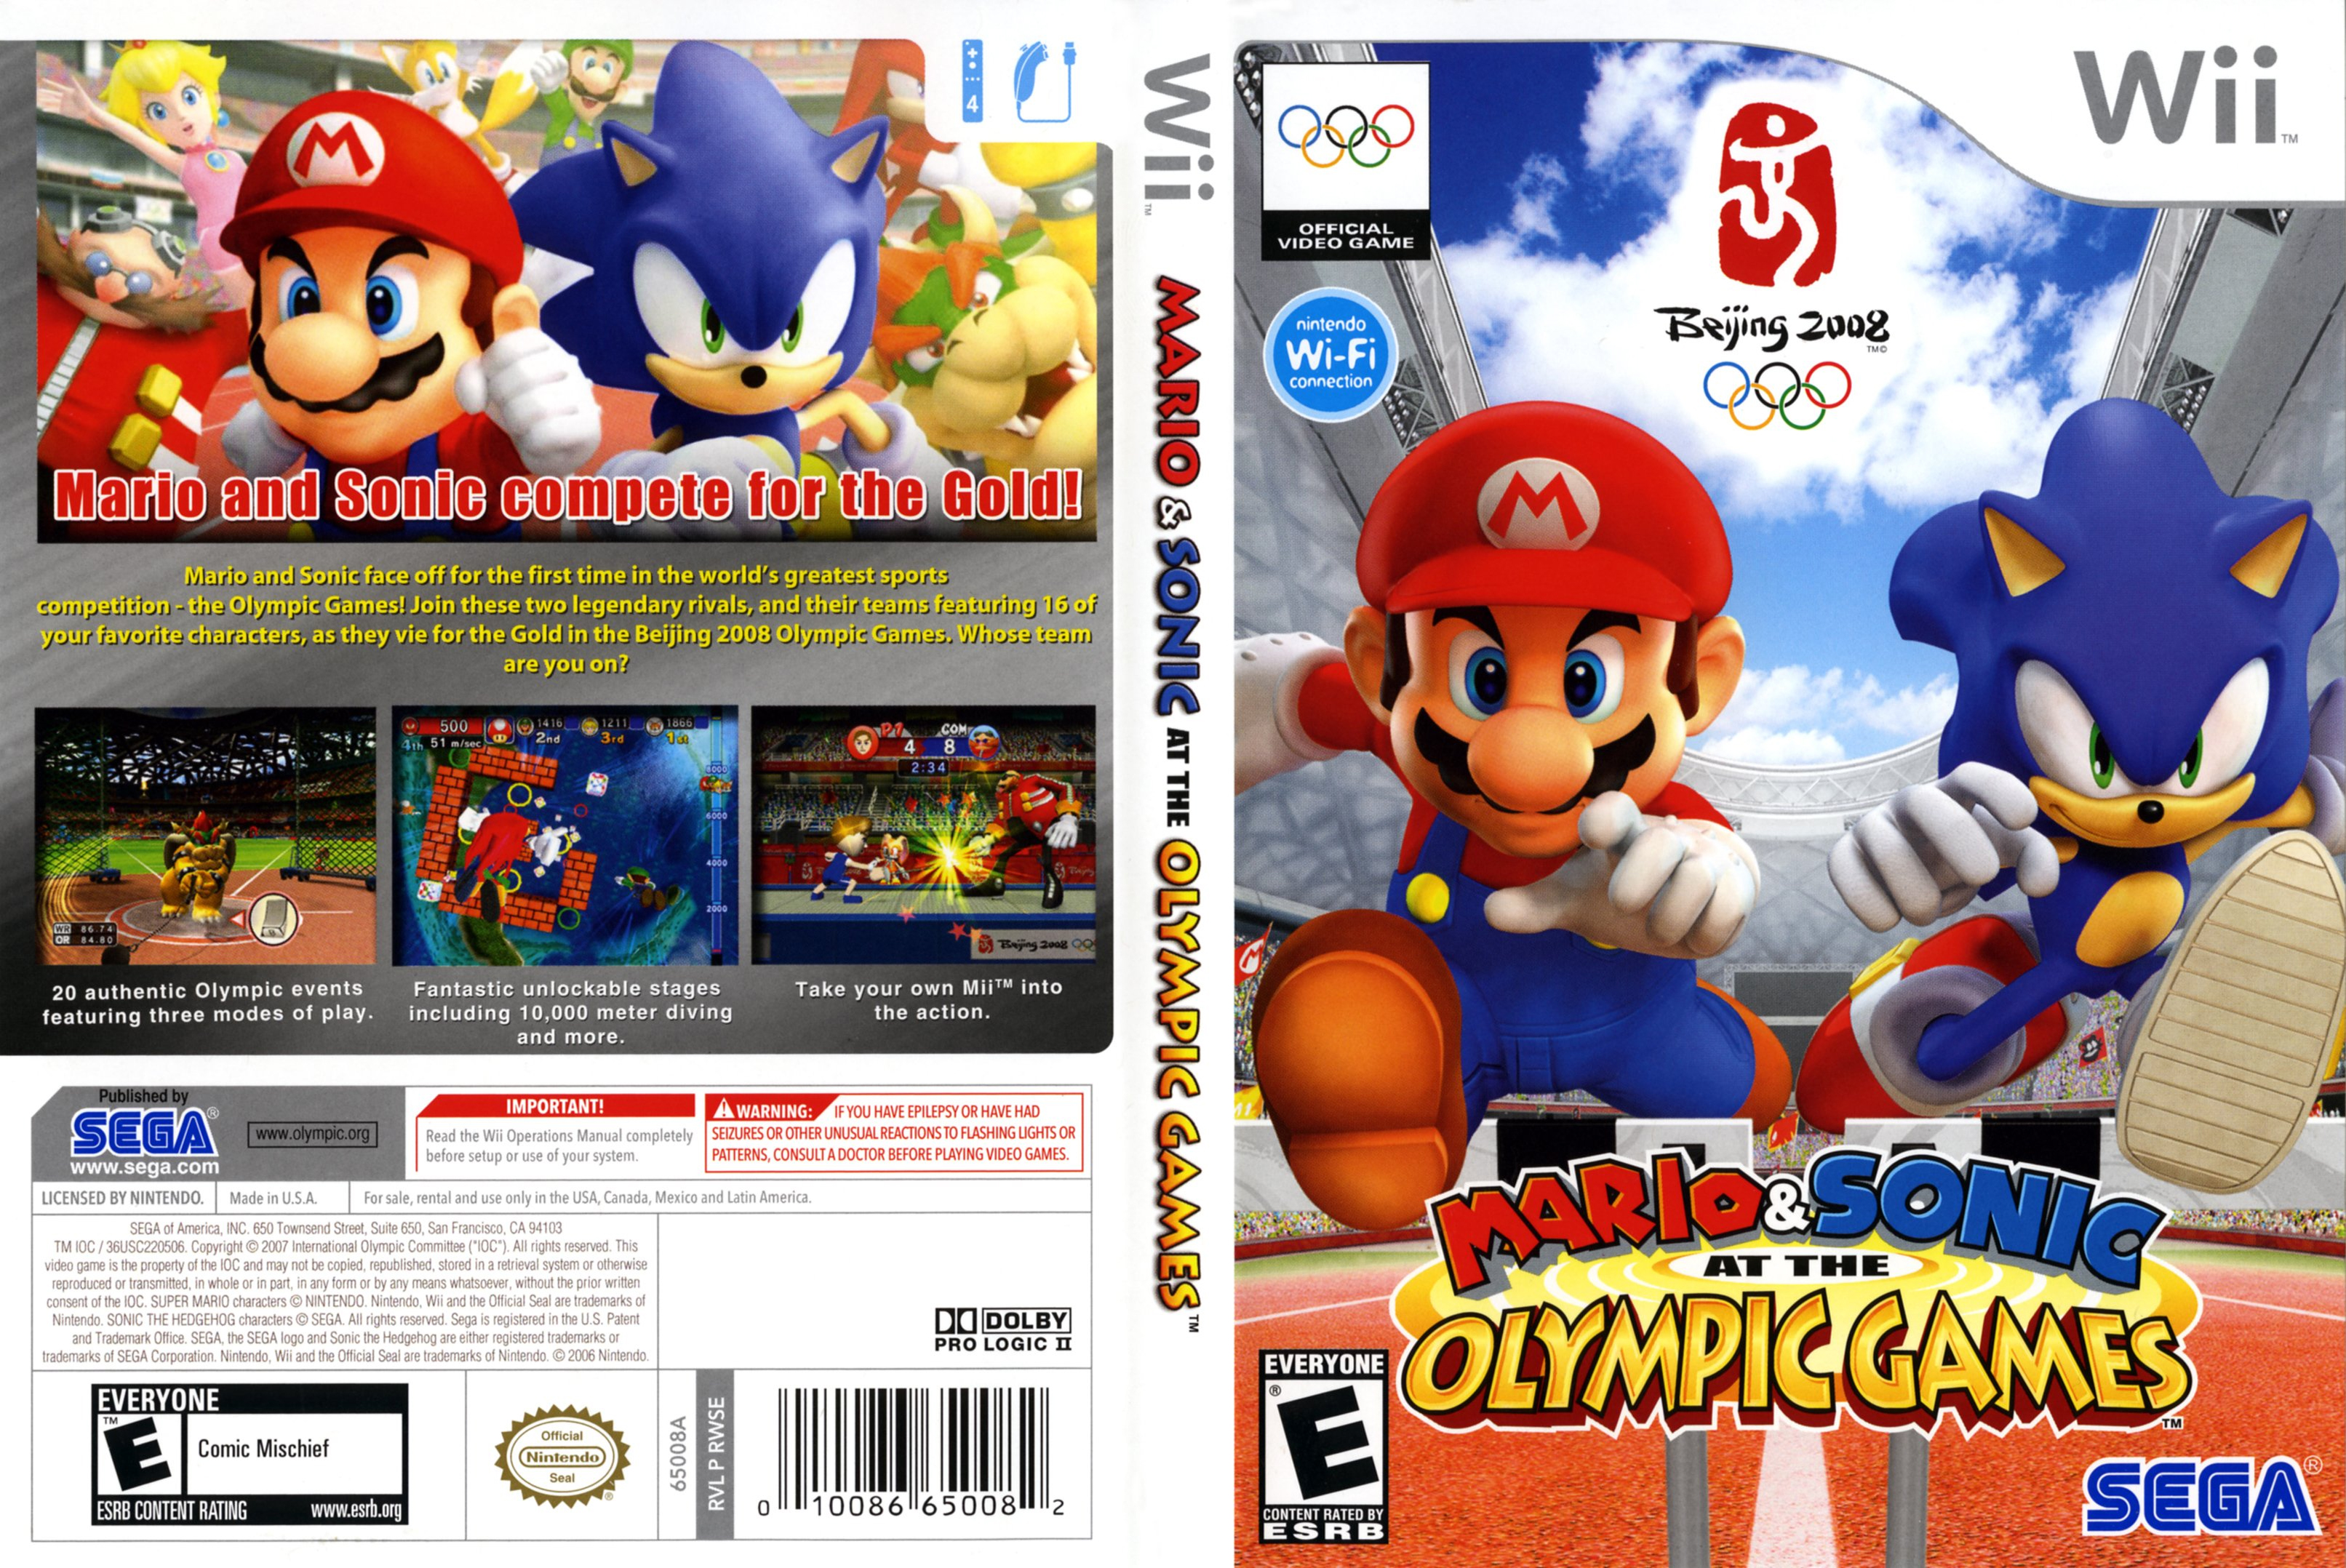 Mario-and-sonic-at-the-olympic-games-wii.jpg